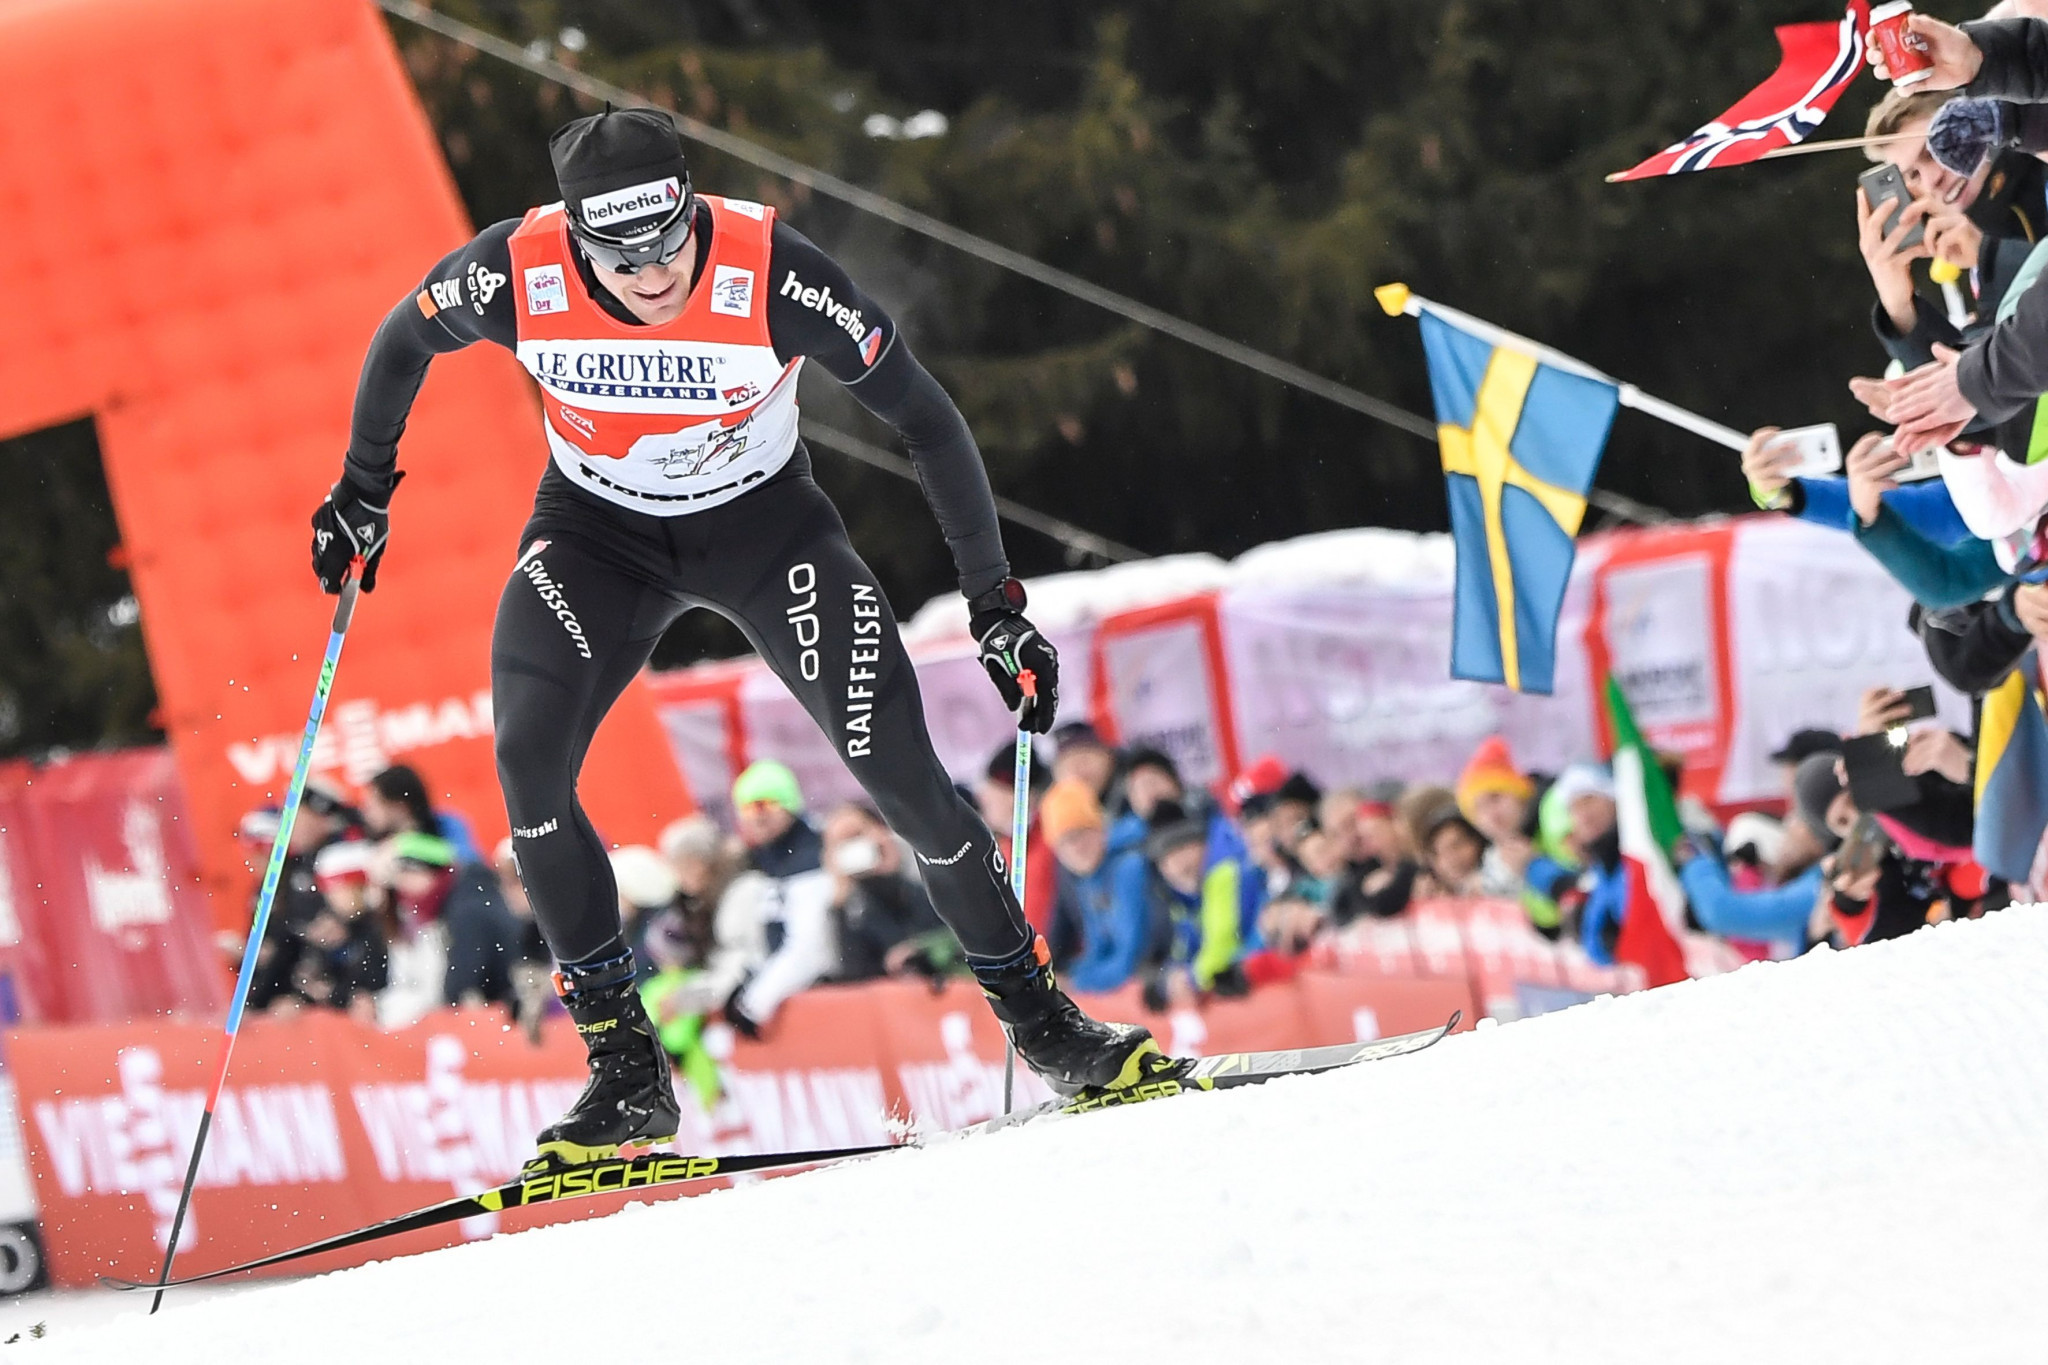 The free tickets will be for events which are not expected to be well attended, such as cross-country skiing and biathlon ©Getty Images